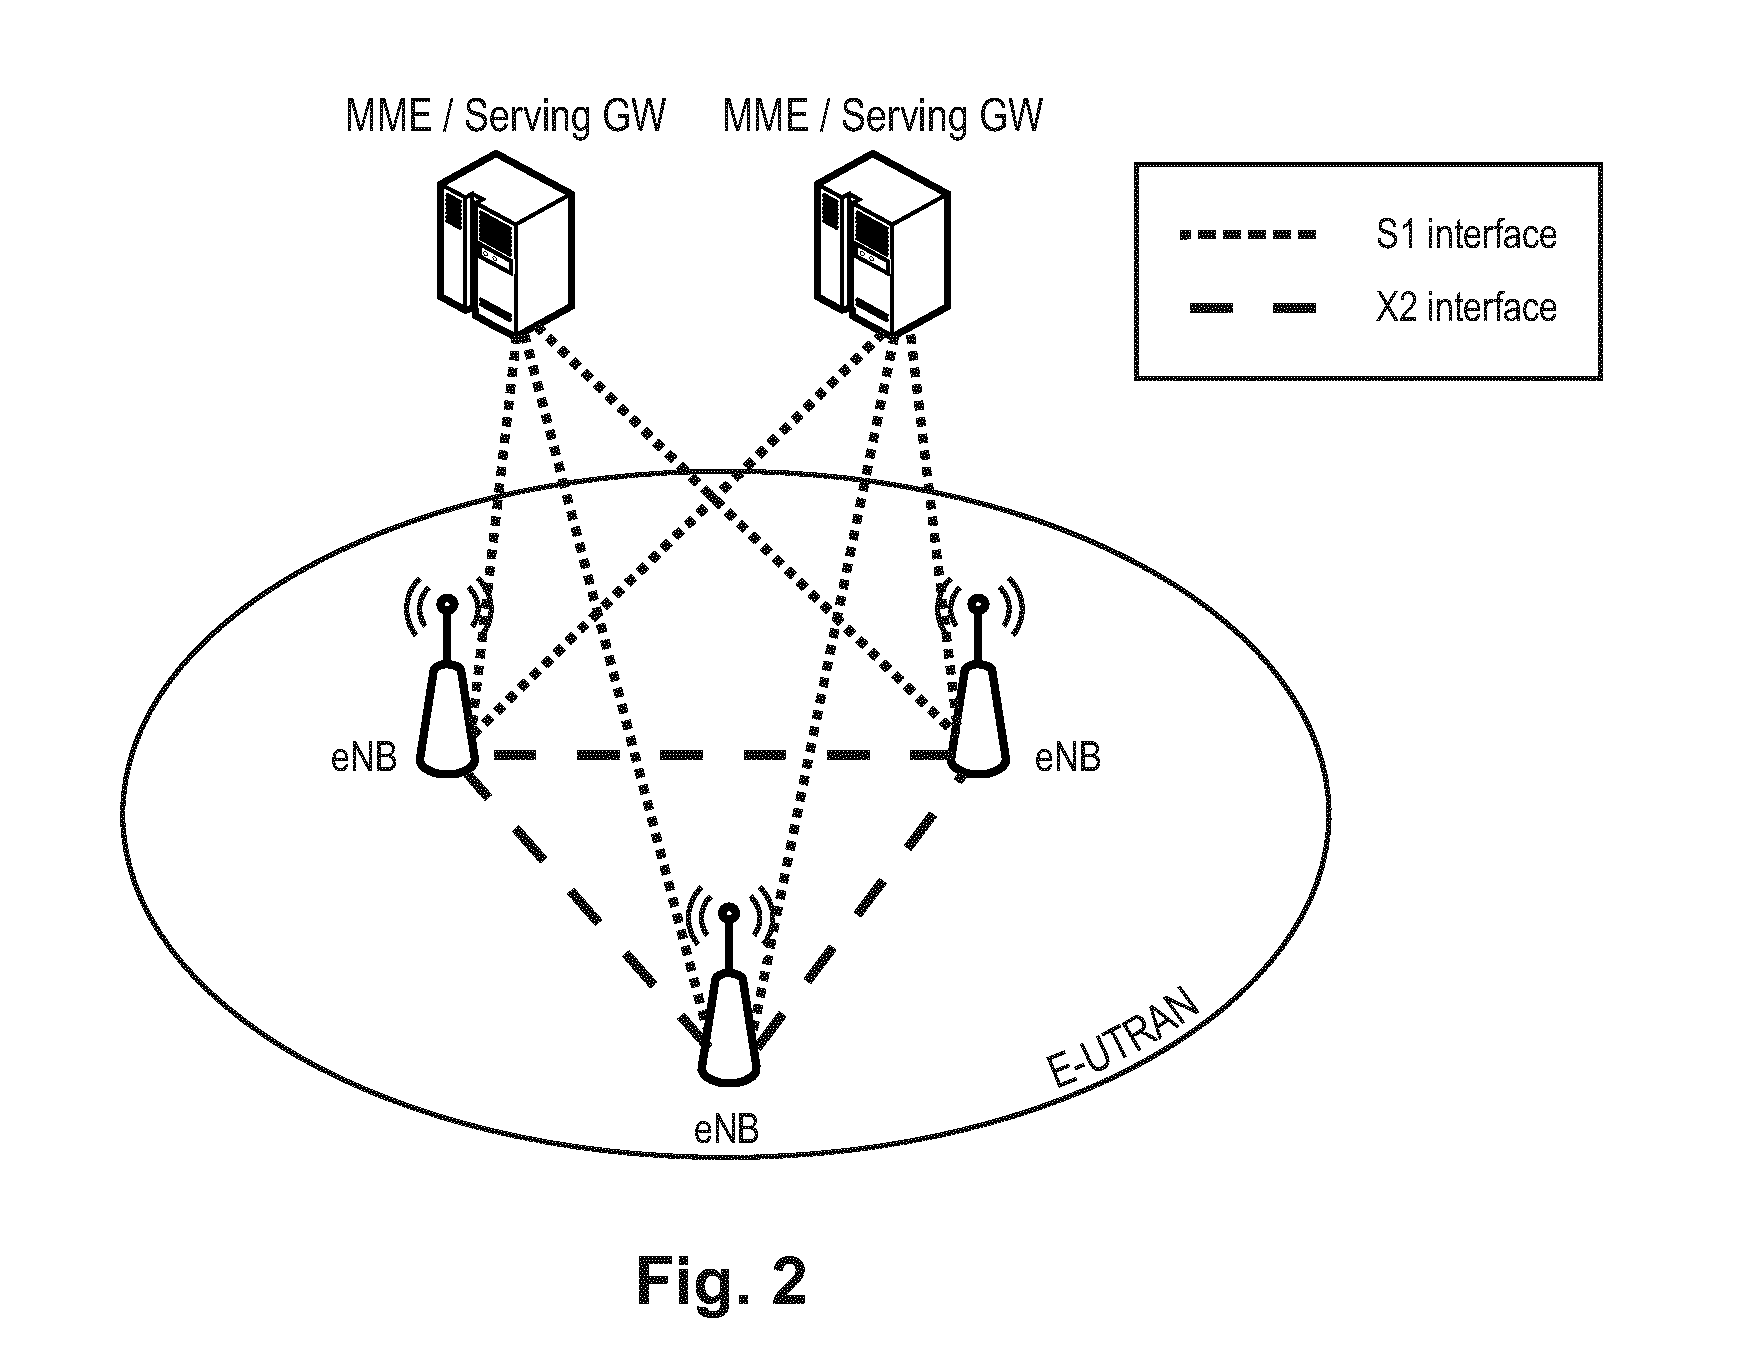 Handoff procedure in a mobile communication system